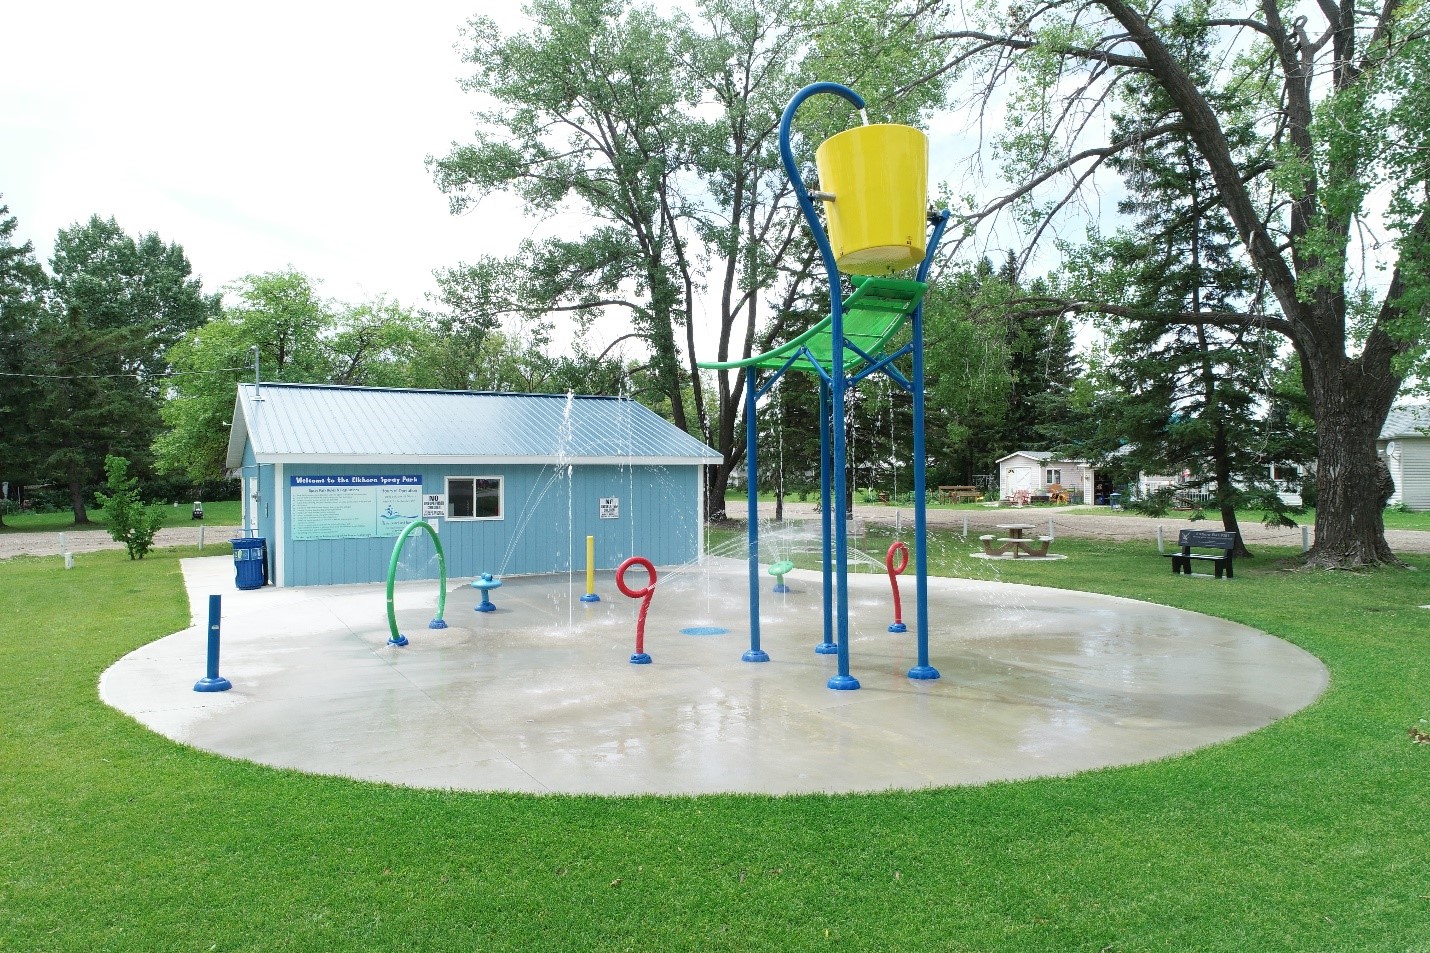 A colourful water spray park with a small blue outbuilding, surrounded by grass and trees.